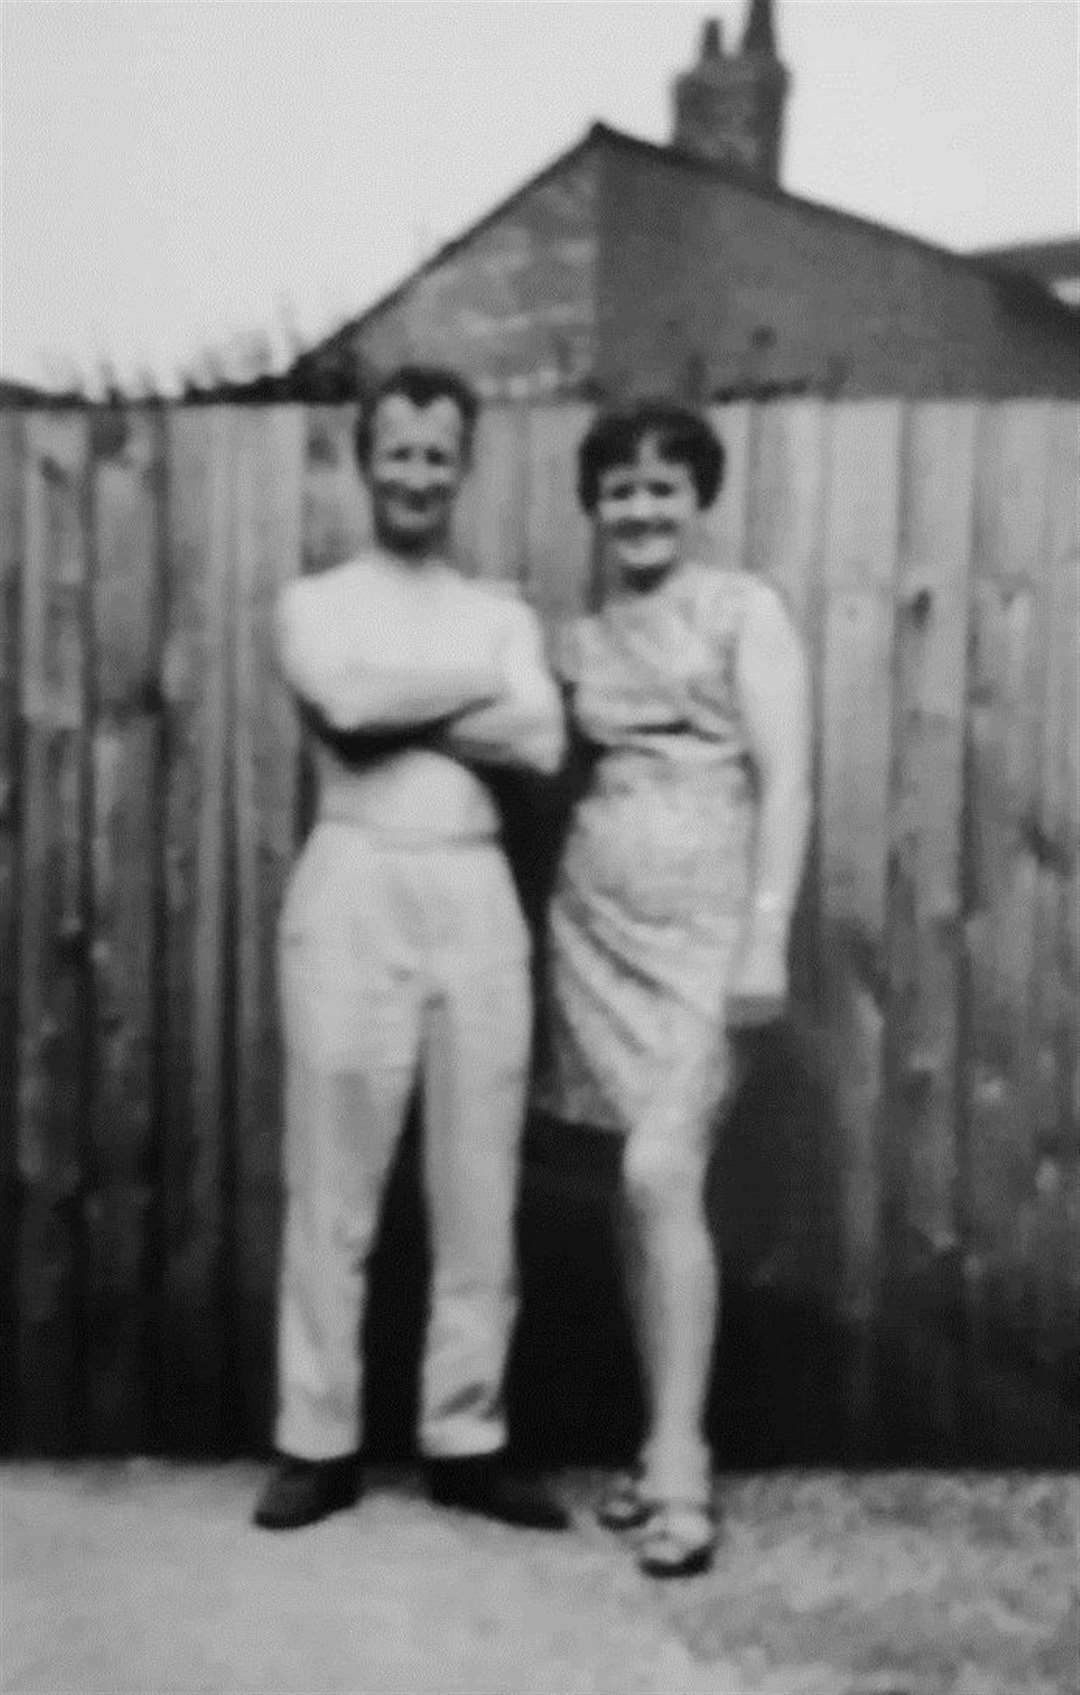 A snapshot of Cedric and Joyce Bibby from the family album.